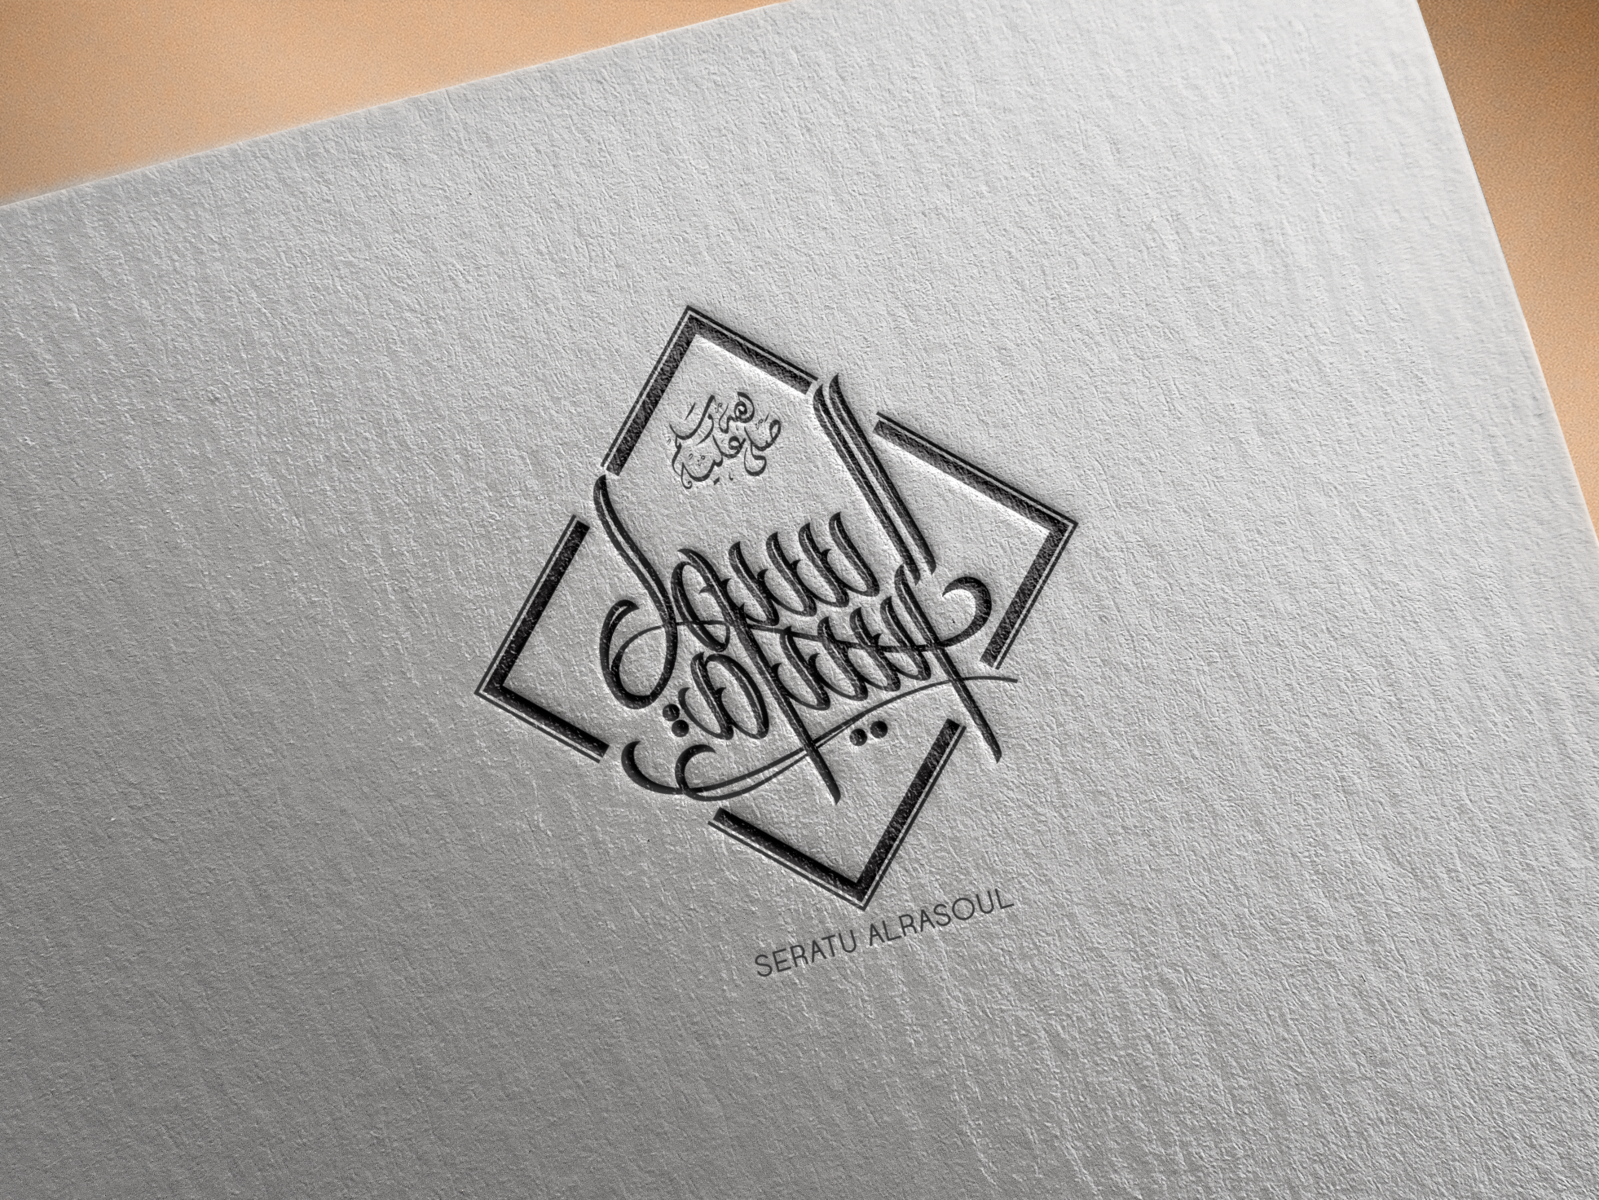 Download Free Logo Mockup Psd On Textured Paper by Ahmed Gaballa on Dribbble